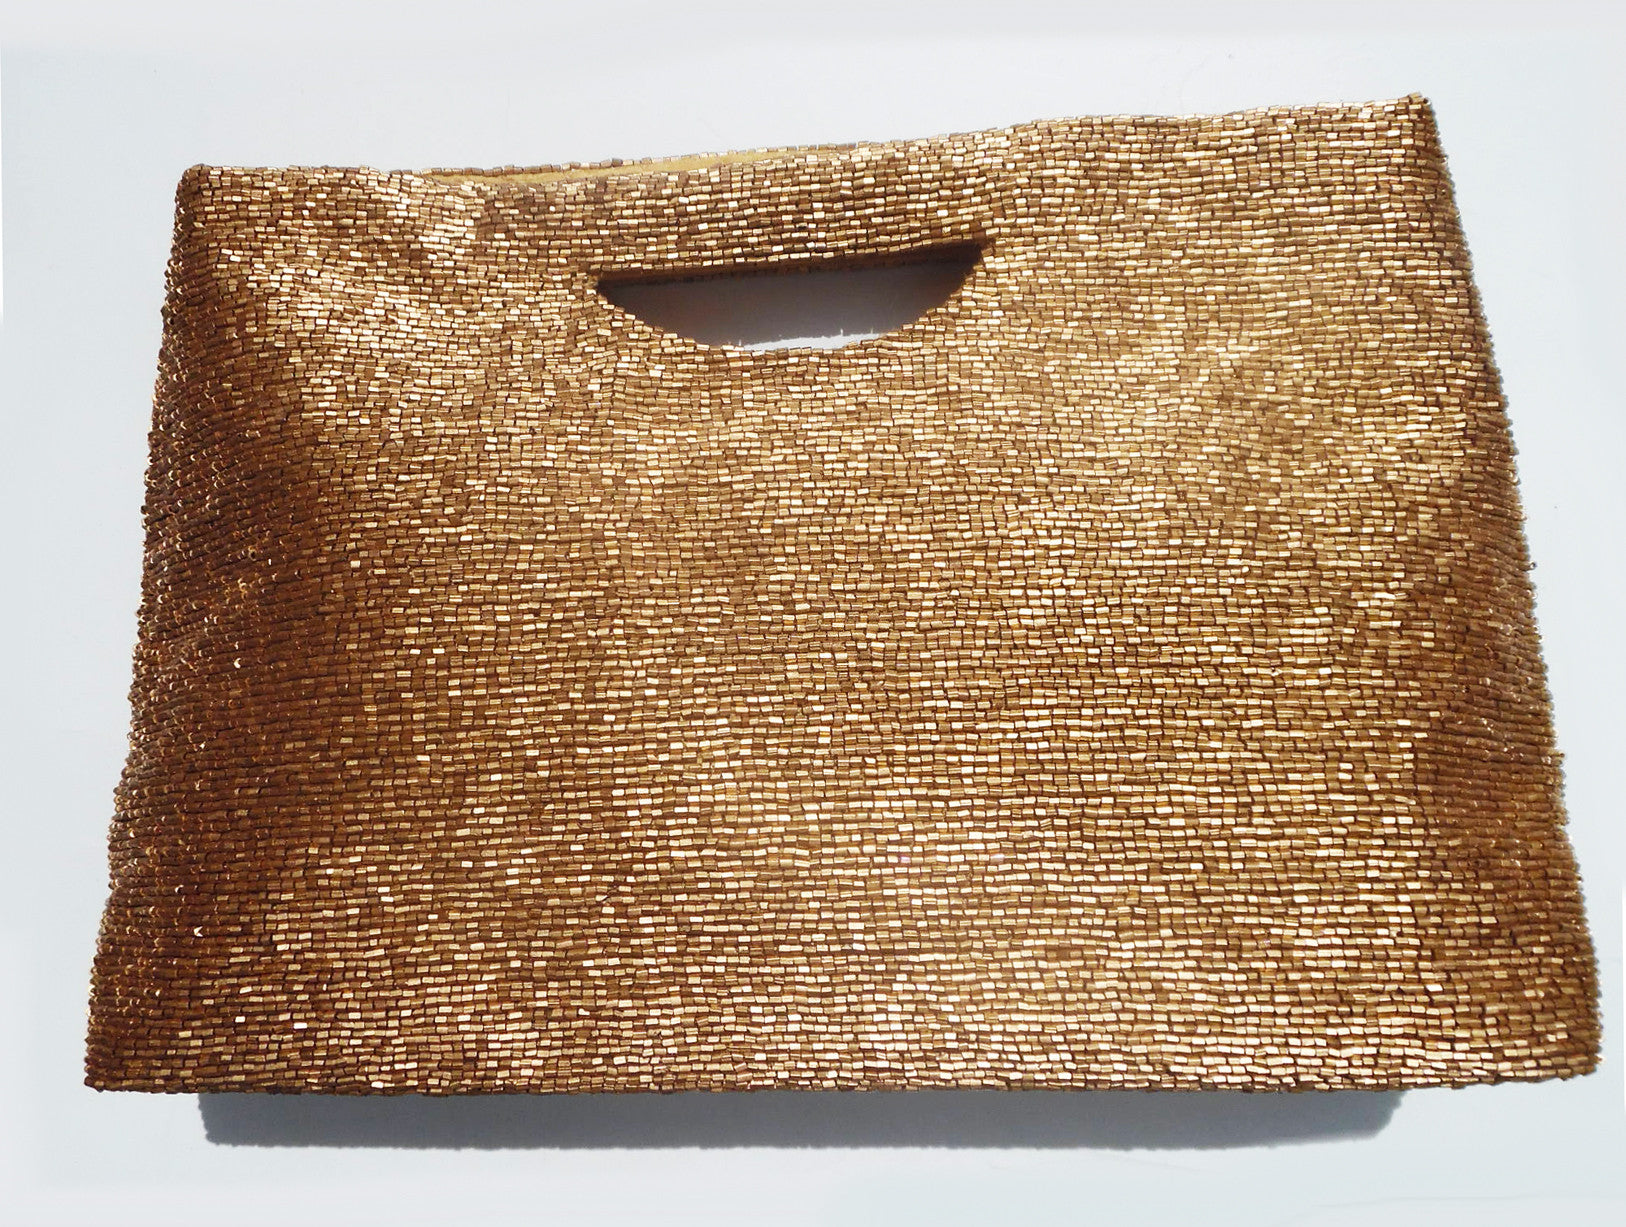 Beaded Evening Bag with Handle Matte Black or Gold 2 Sizes